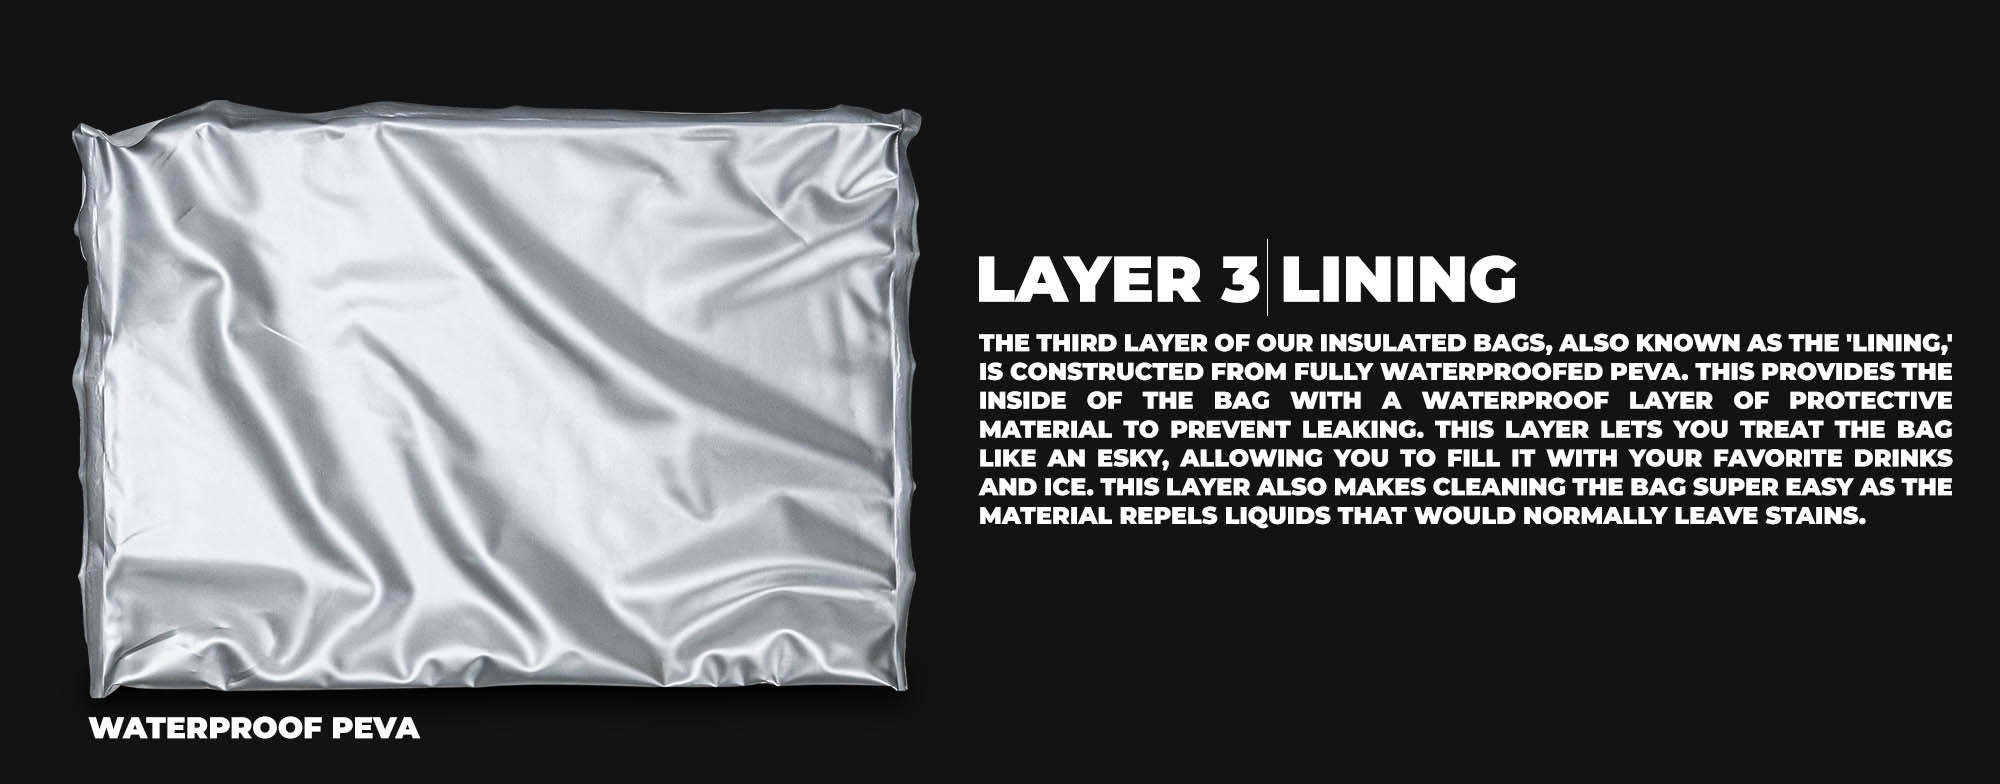 The third layer of our insulated bags, also known as the 'lining,' is constructed from fully waterproofed PEVA. This provides the inside of the bag with a waterproof layer of protective material to prevent leaking. This layer lets you treat the bag like an esky, allowing you to fill it with your favorite drinks and ice. This layer also makes cleaning the bag super easy as the material repels liquids that would normally leave stains.